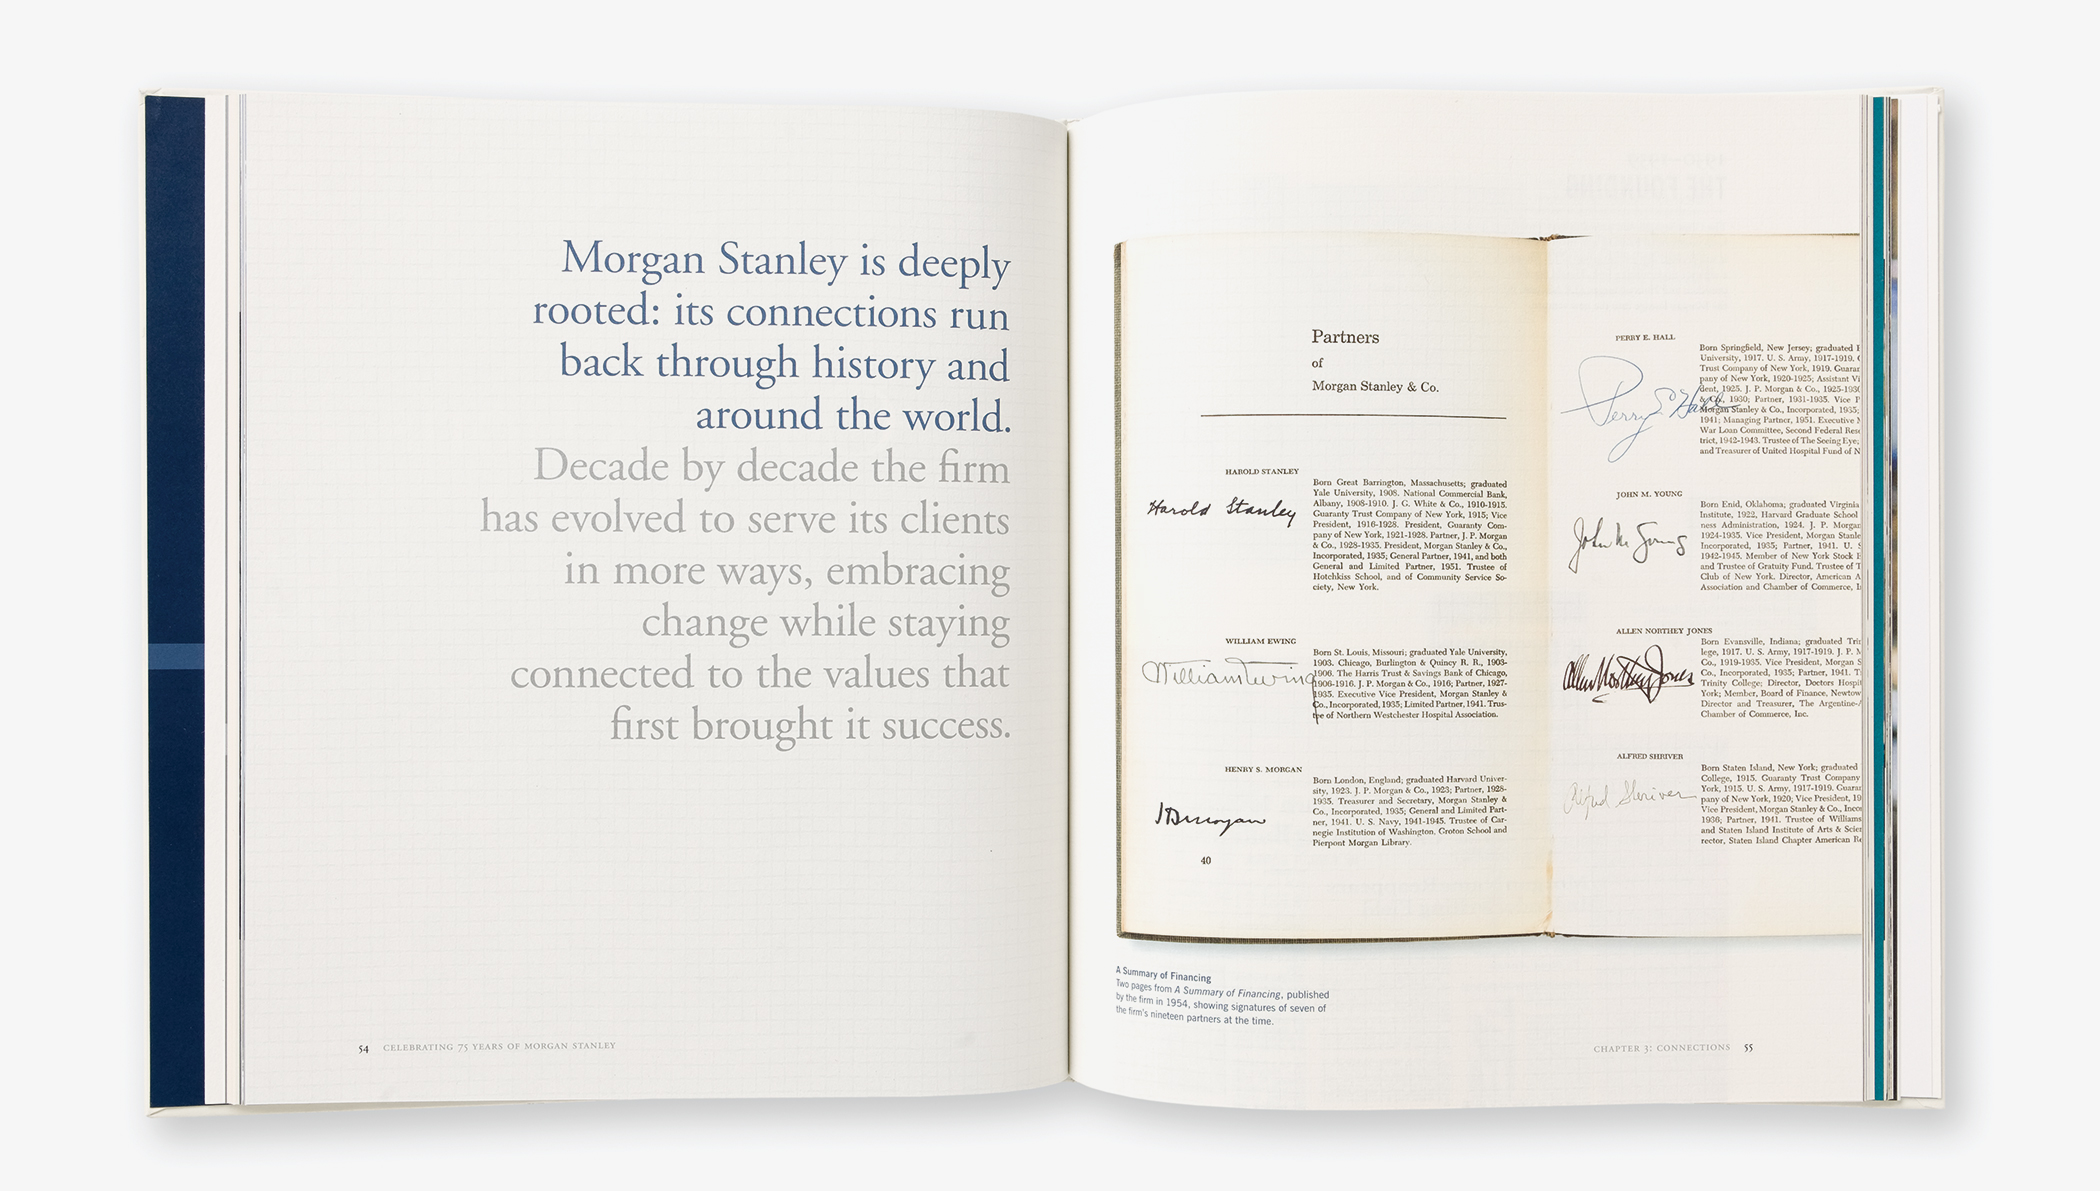 Pages from the Morgan Stanley 75th anniversary commemorative book with images of a early list of partner's signatures and their bios.